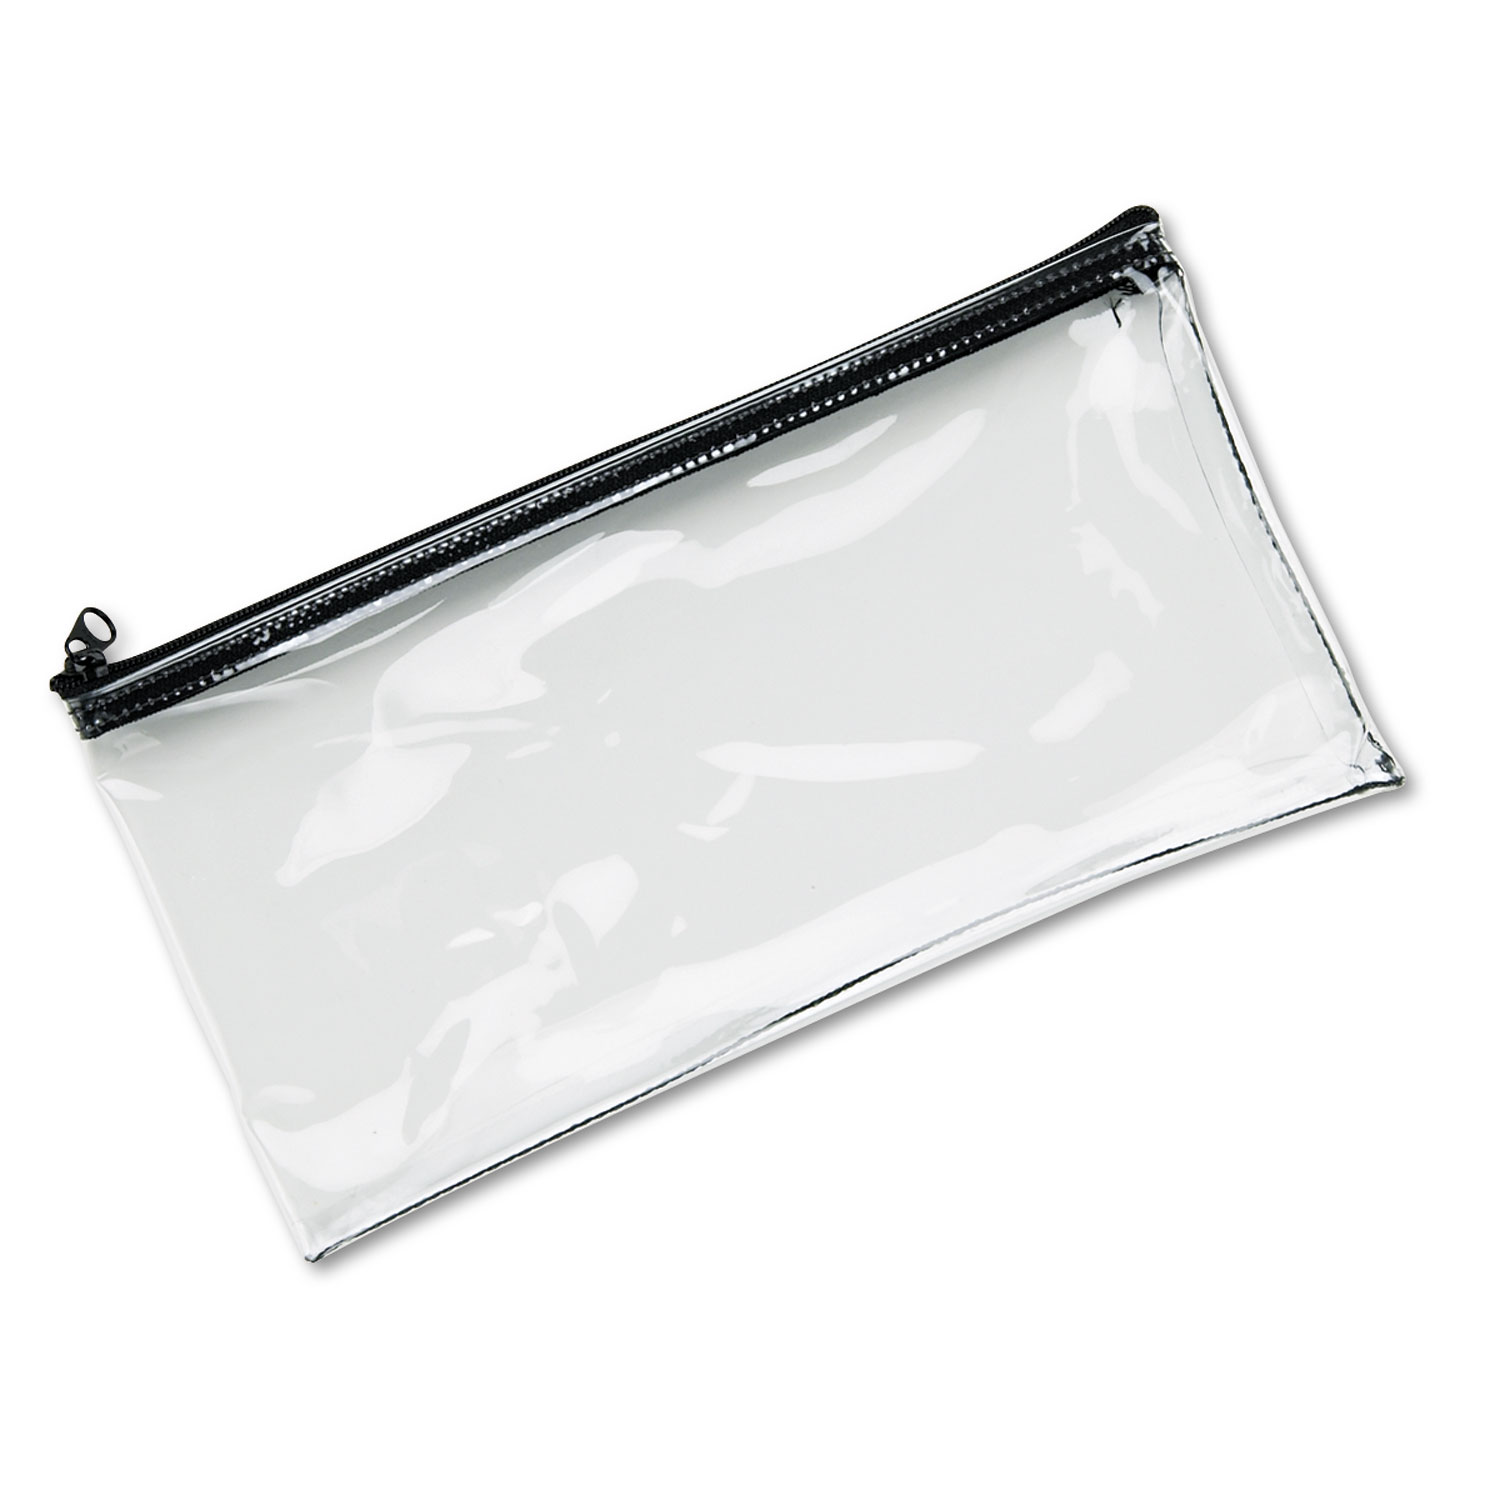  MMF Industries 234041720 Leatherette Zippered Wallet, Leather-Like Vinyl, 11w x 6h, Clear (MMF234041720) 